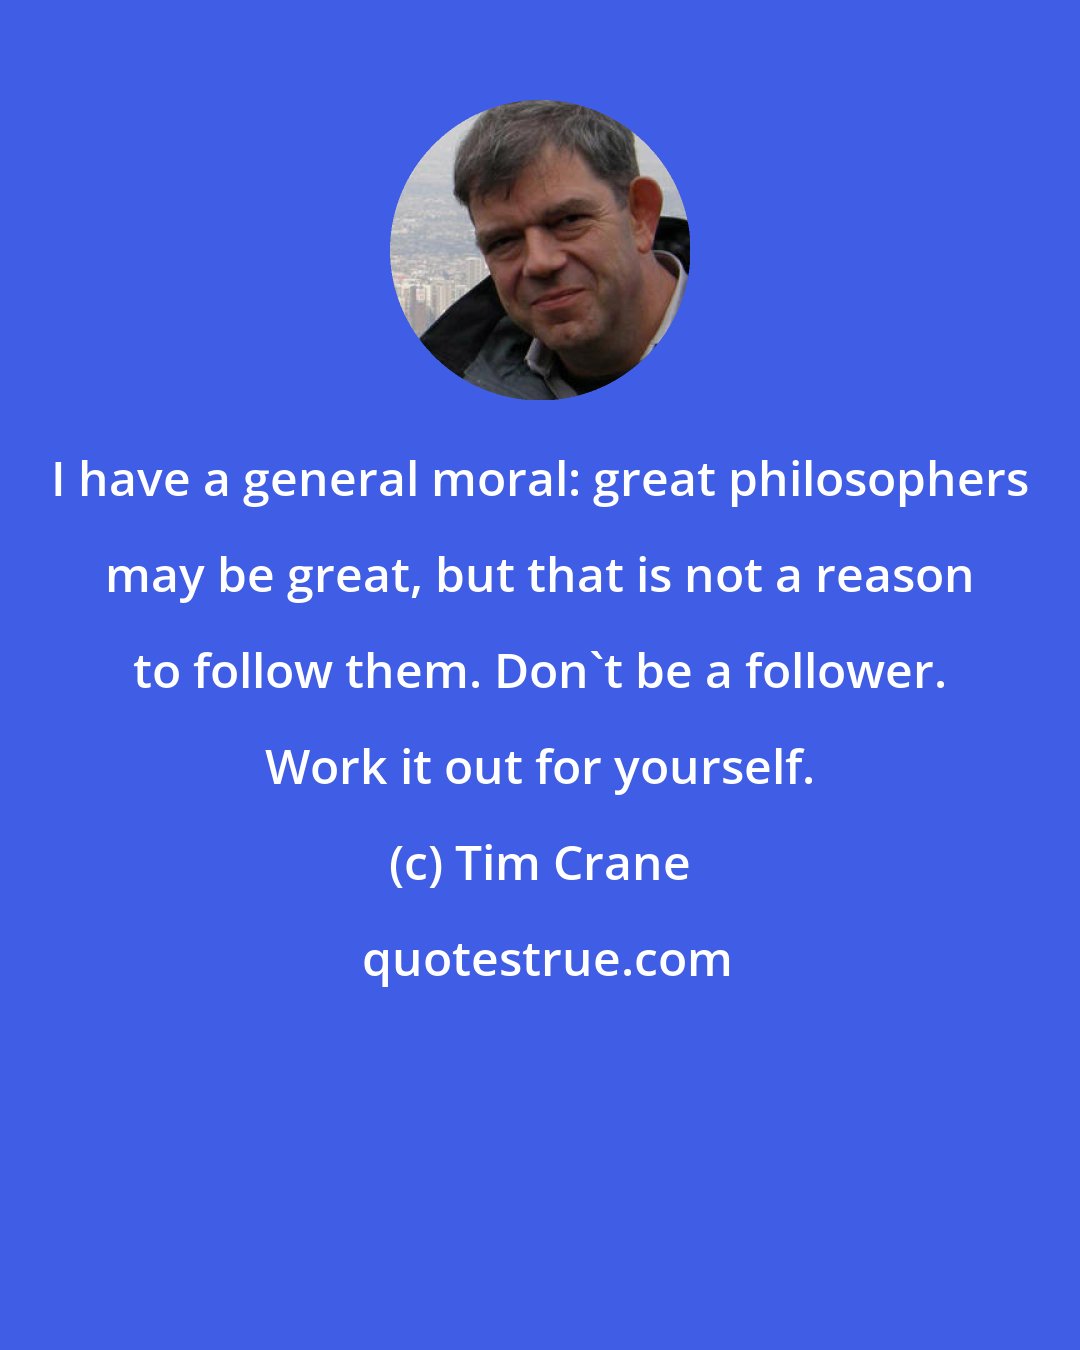 Tim Crane: I have a general moral: great philosophers may be great, but that is not a reason to follow them. Don't be a follower. Work it out for yourself.